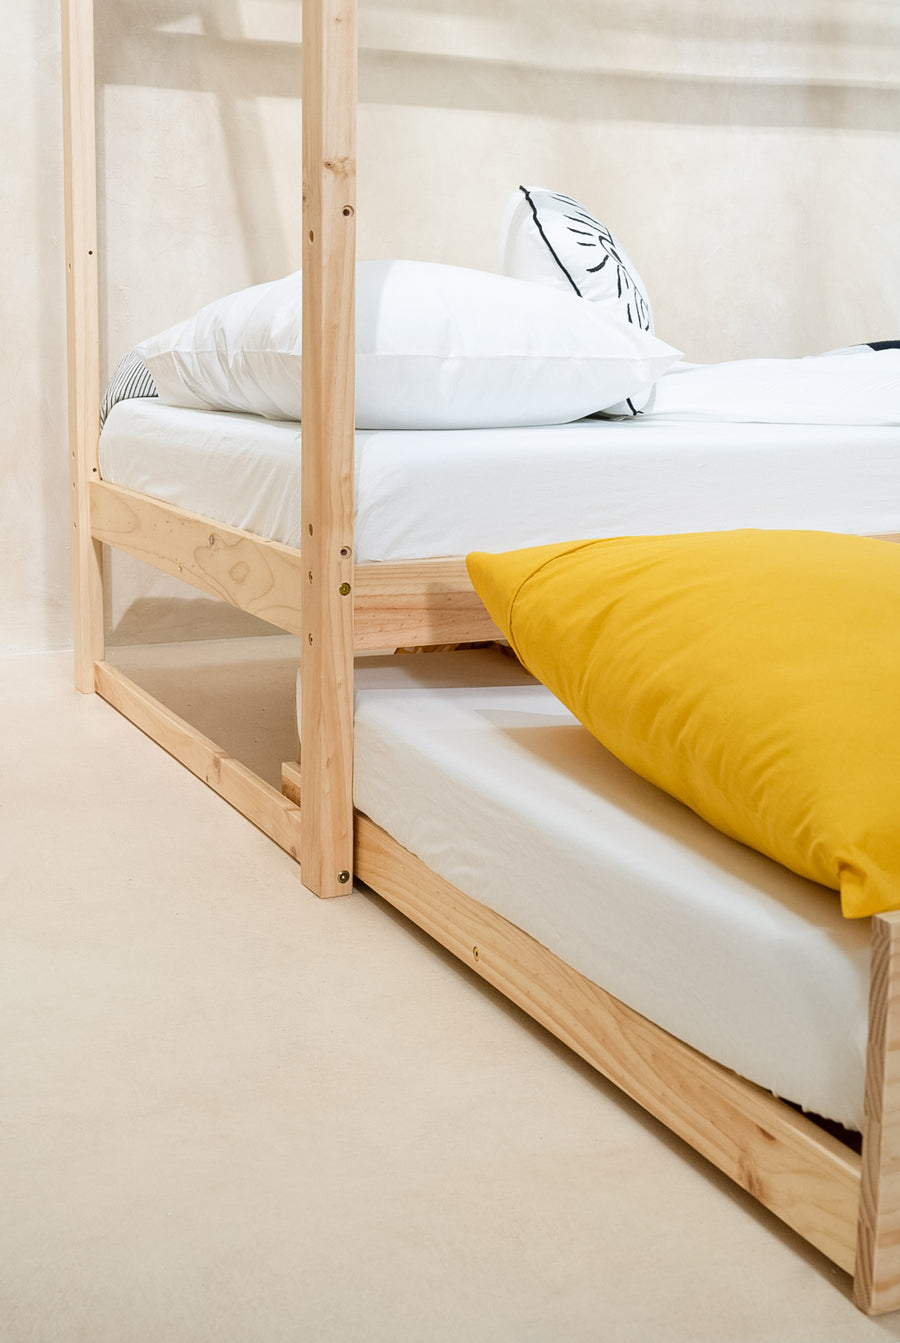 House bed with trundle bed - Natural wood